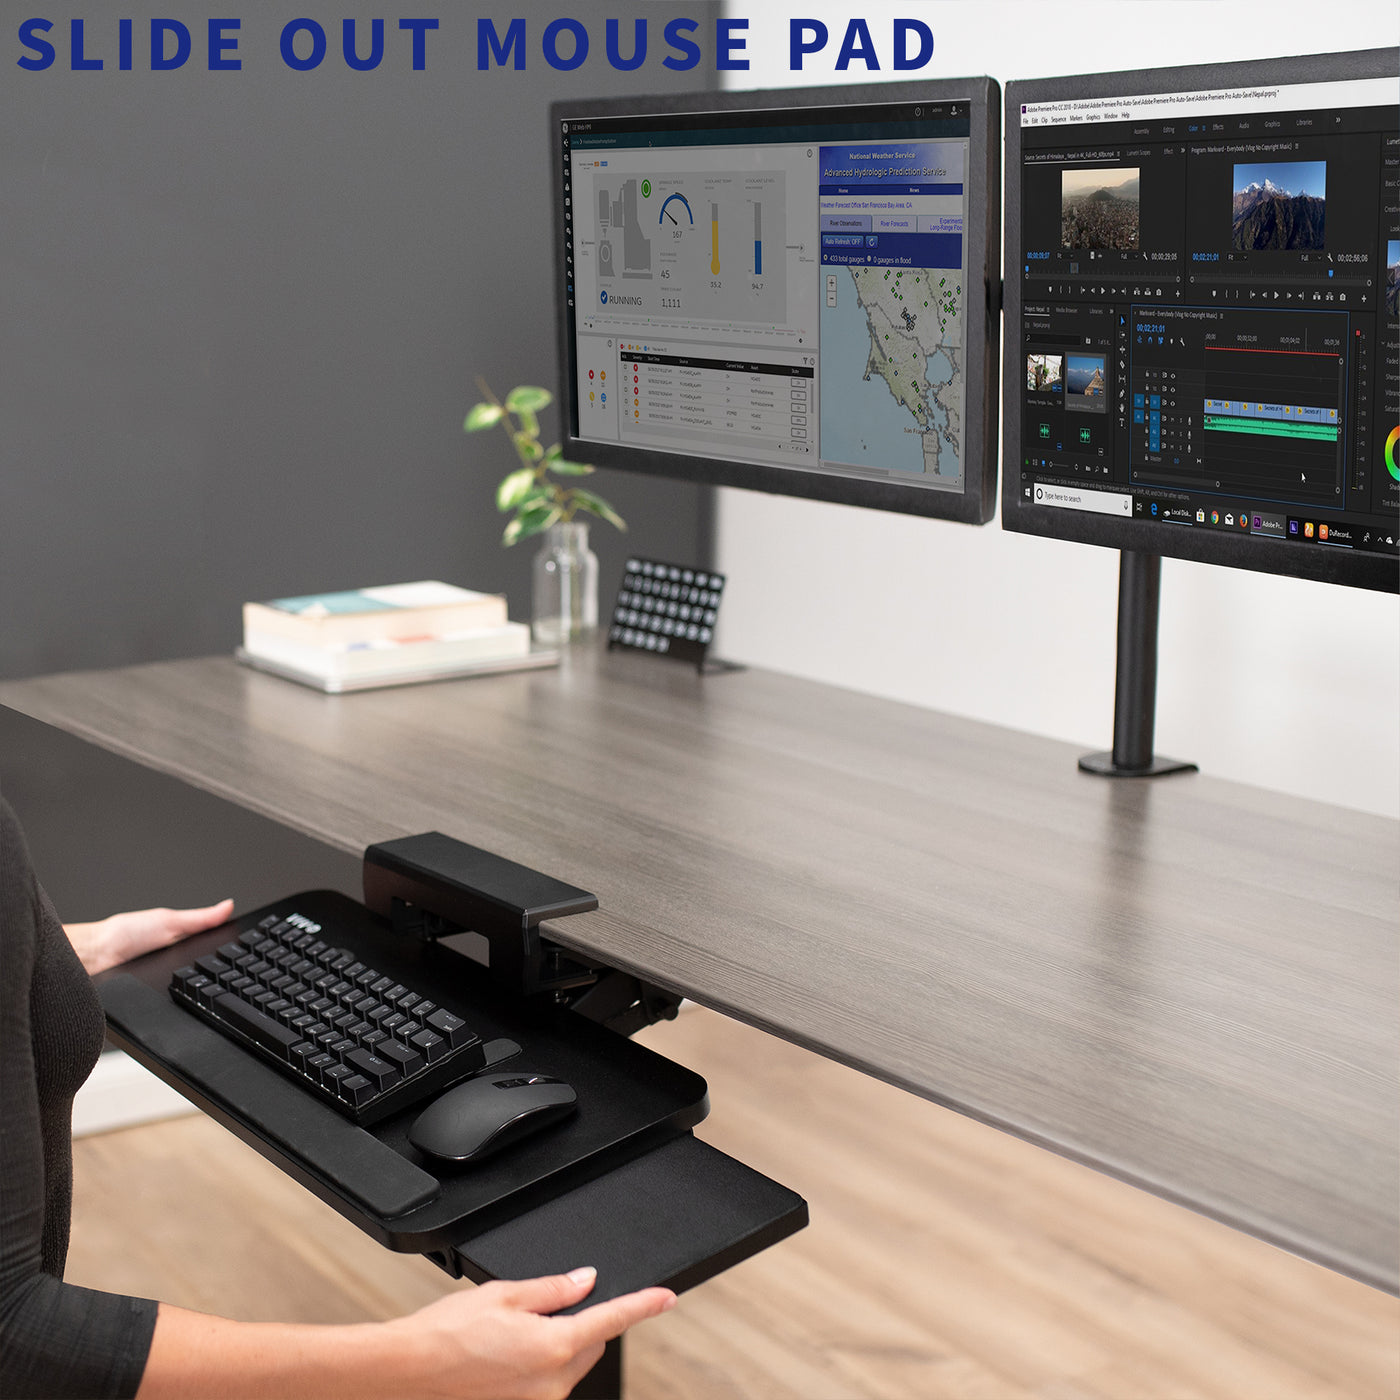 Space-saving adjustable under desk keyboard tray with slide out mousepad.